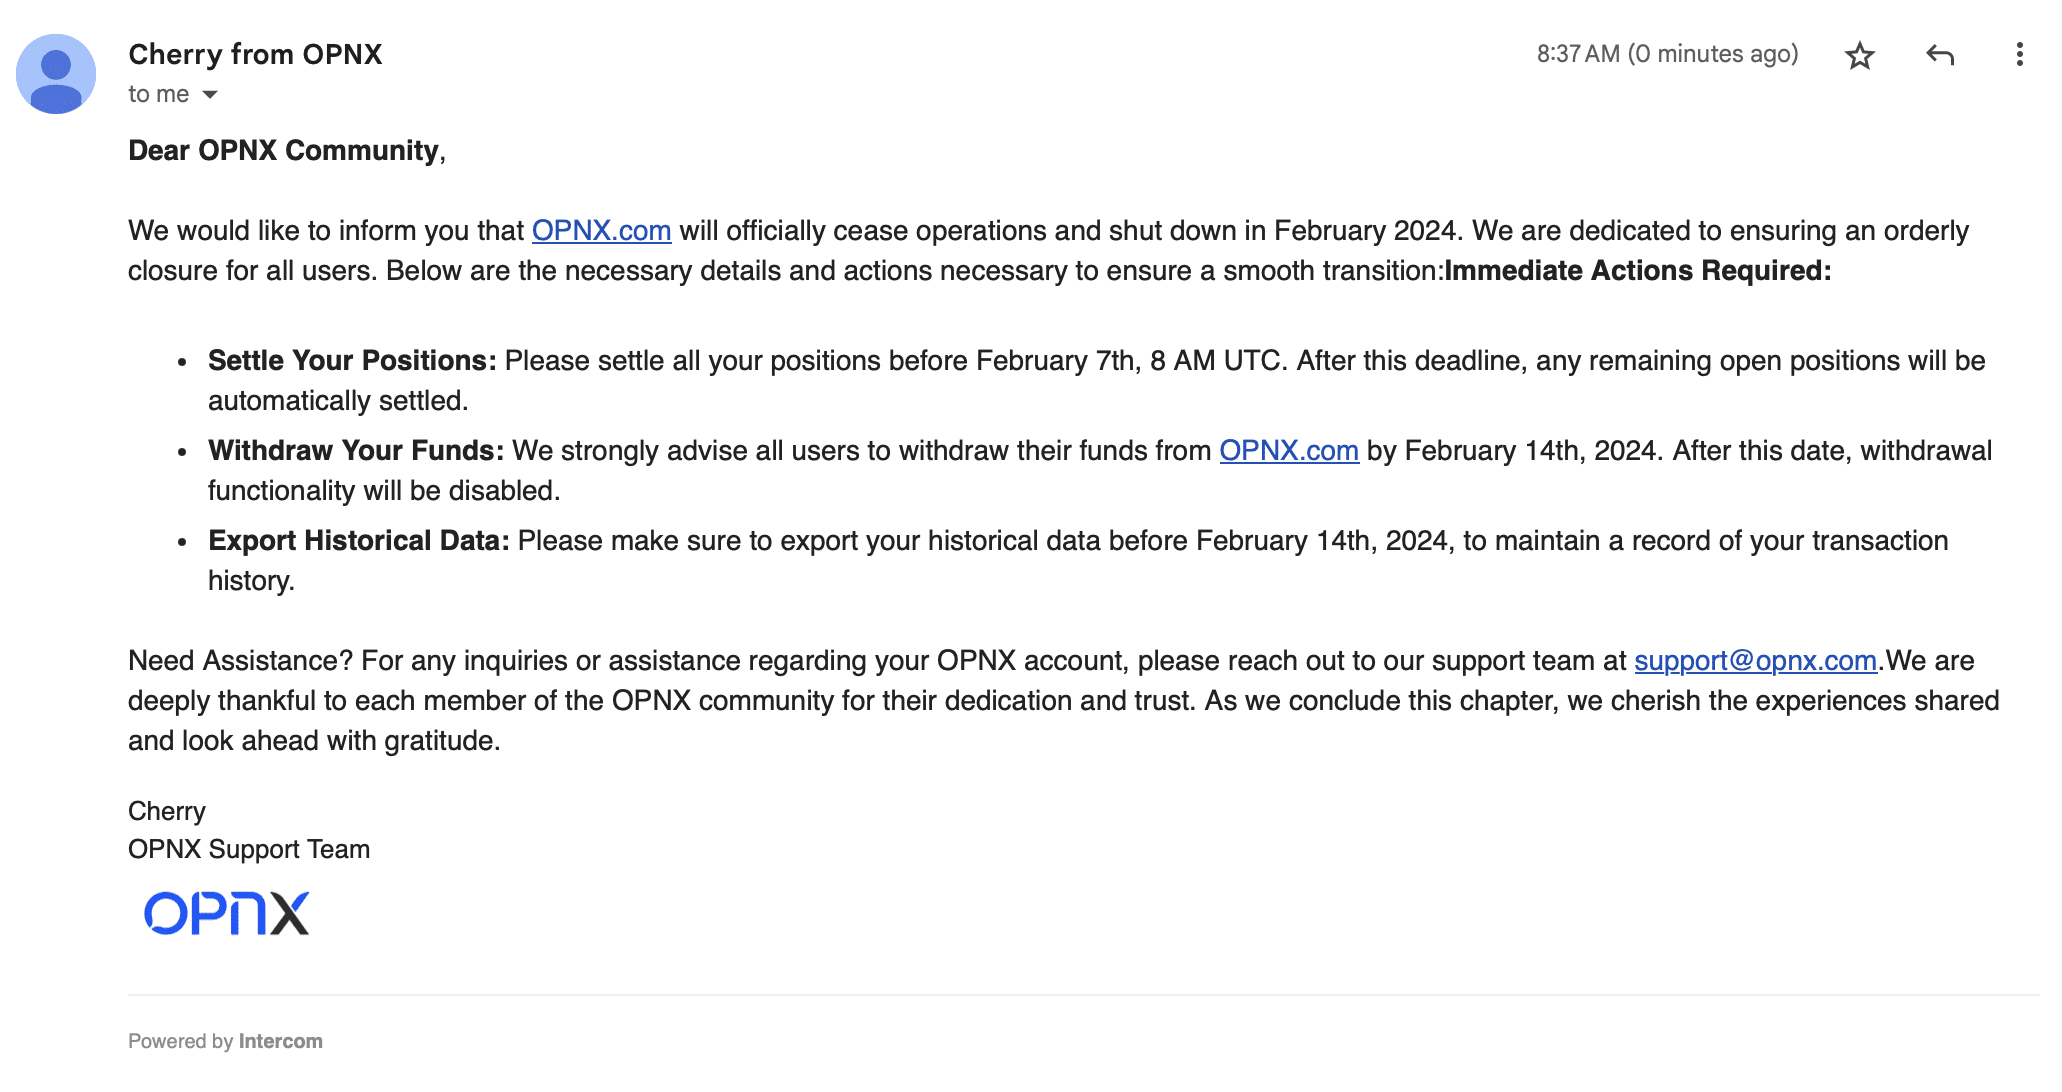 Email to customers announcing the closure of OPNX.